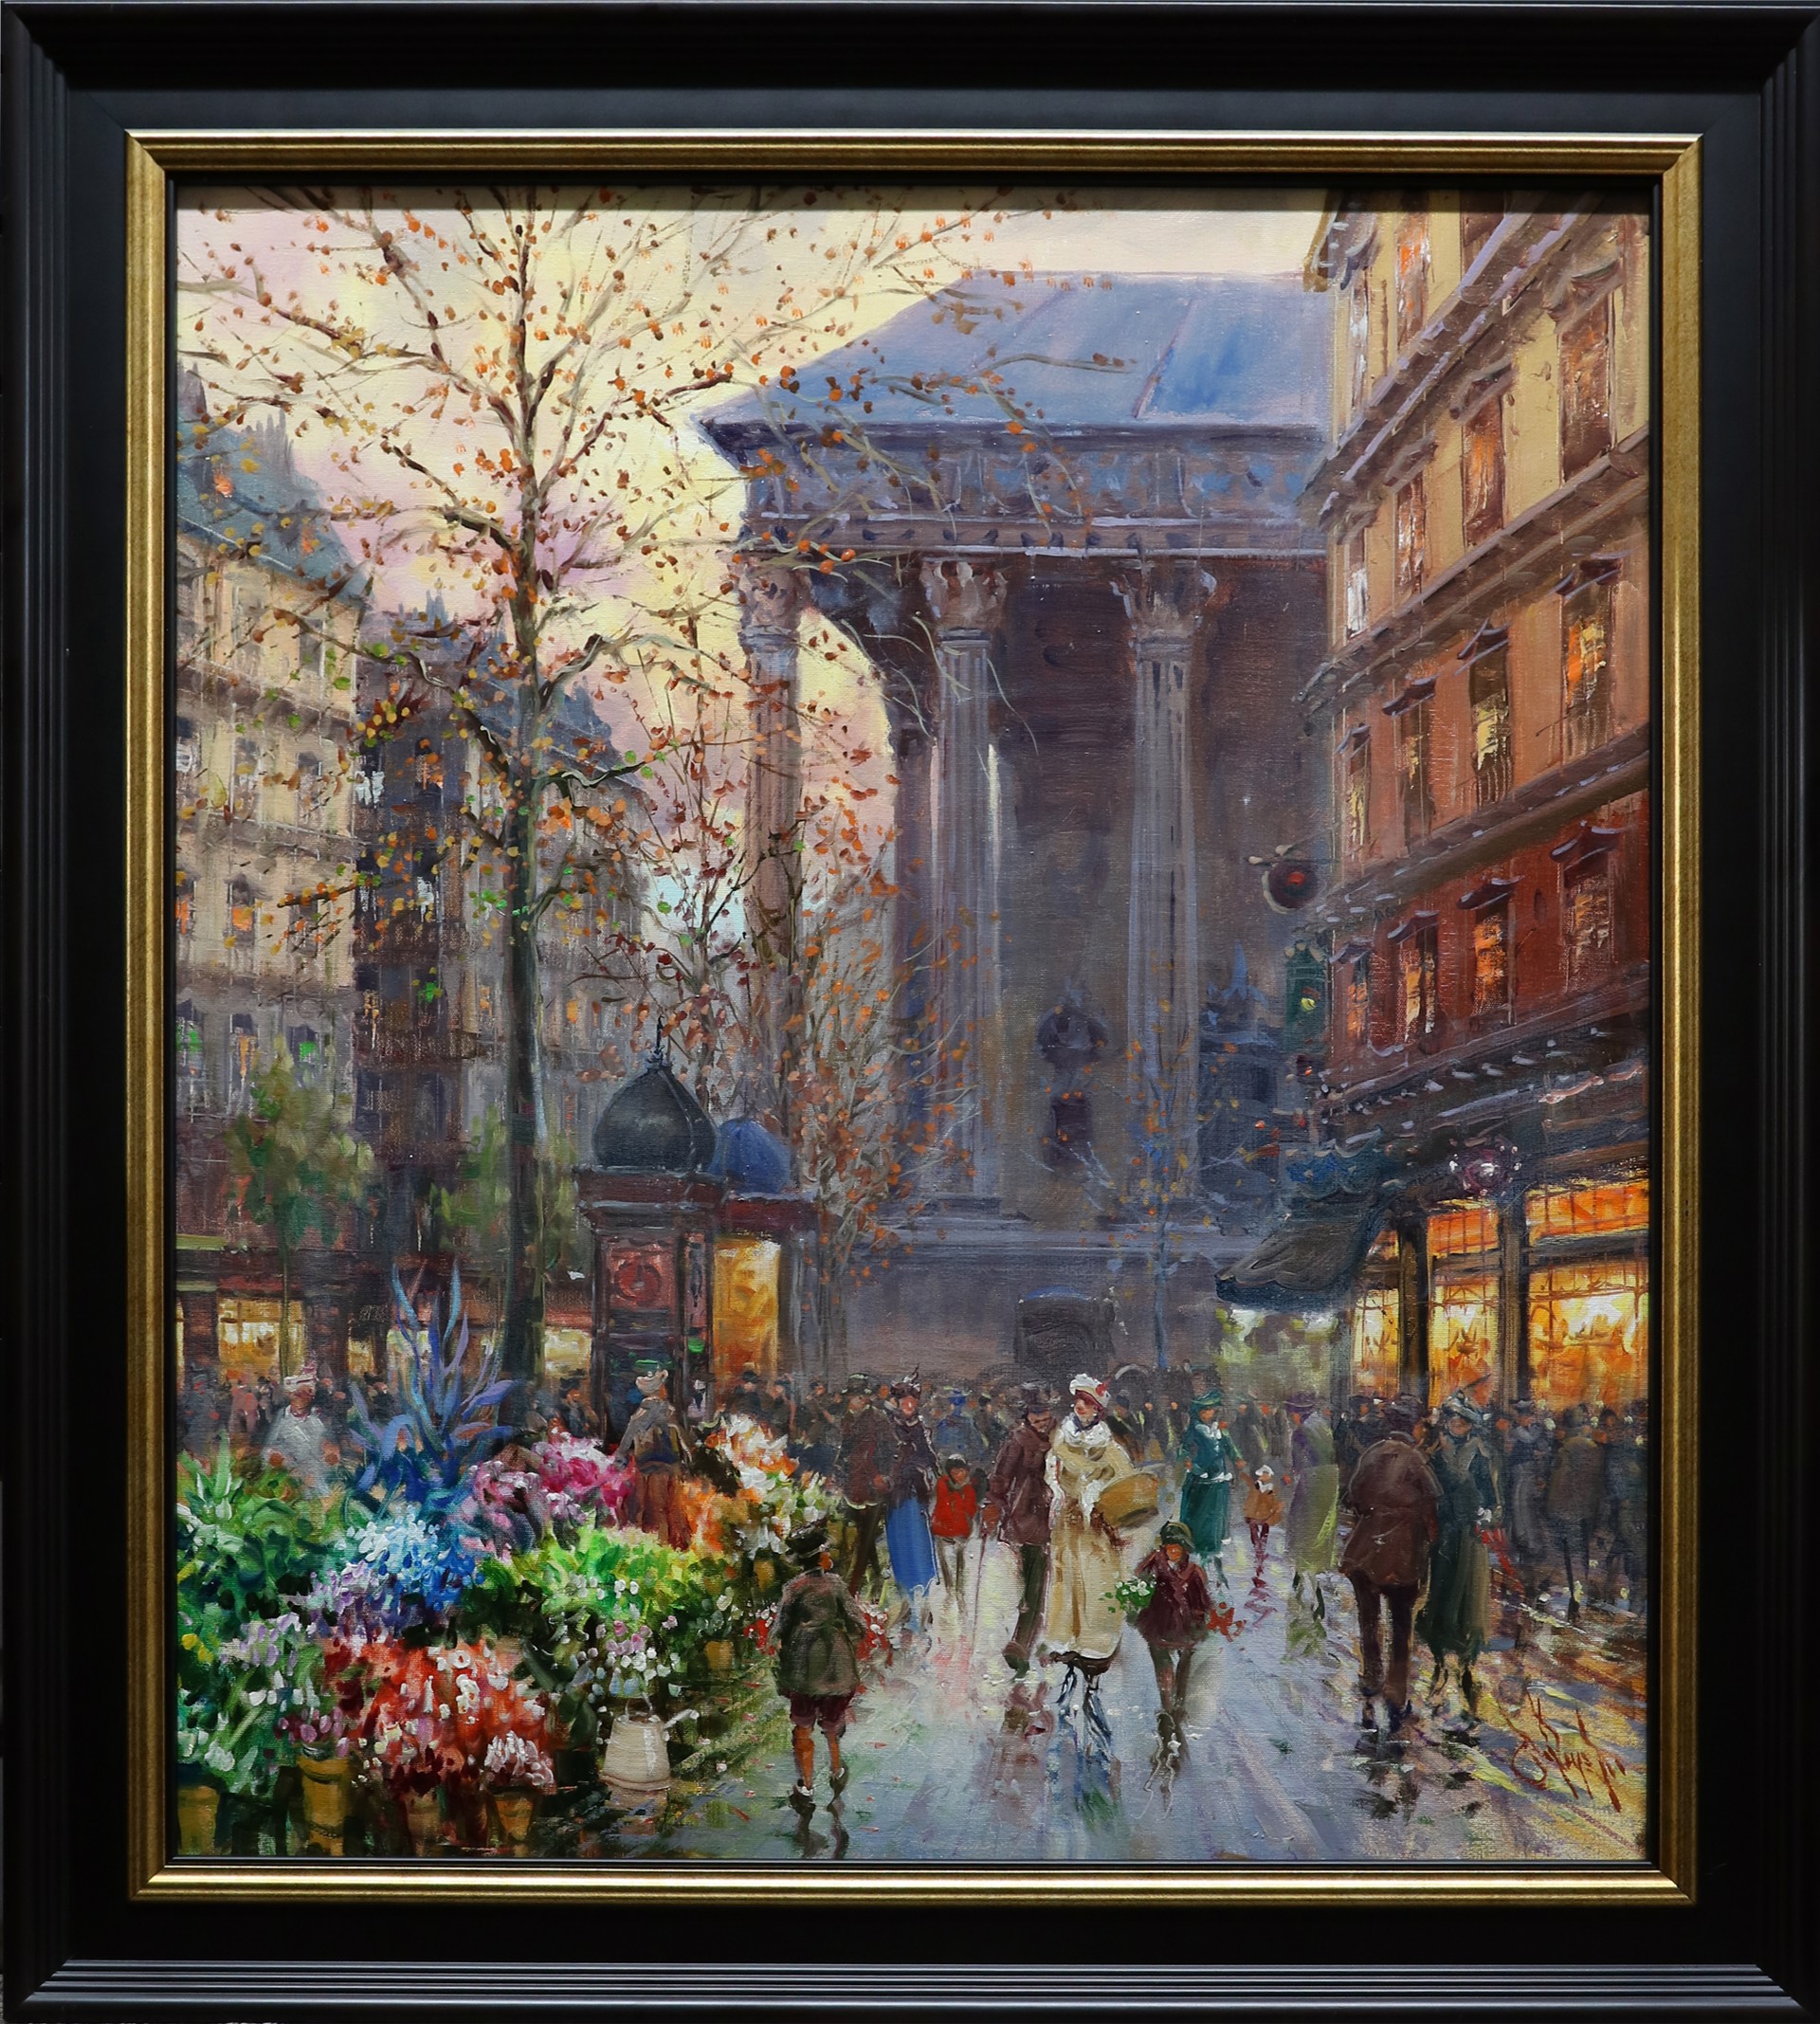 Flowers Market on the Boulevard by Emilio Payes